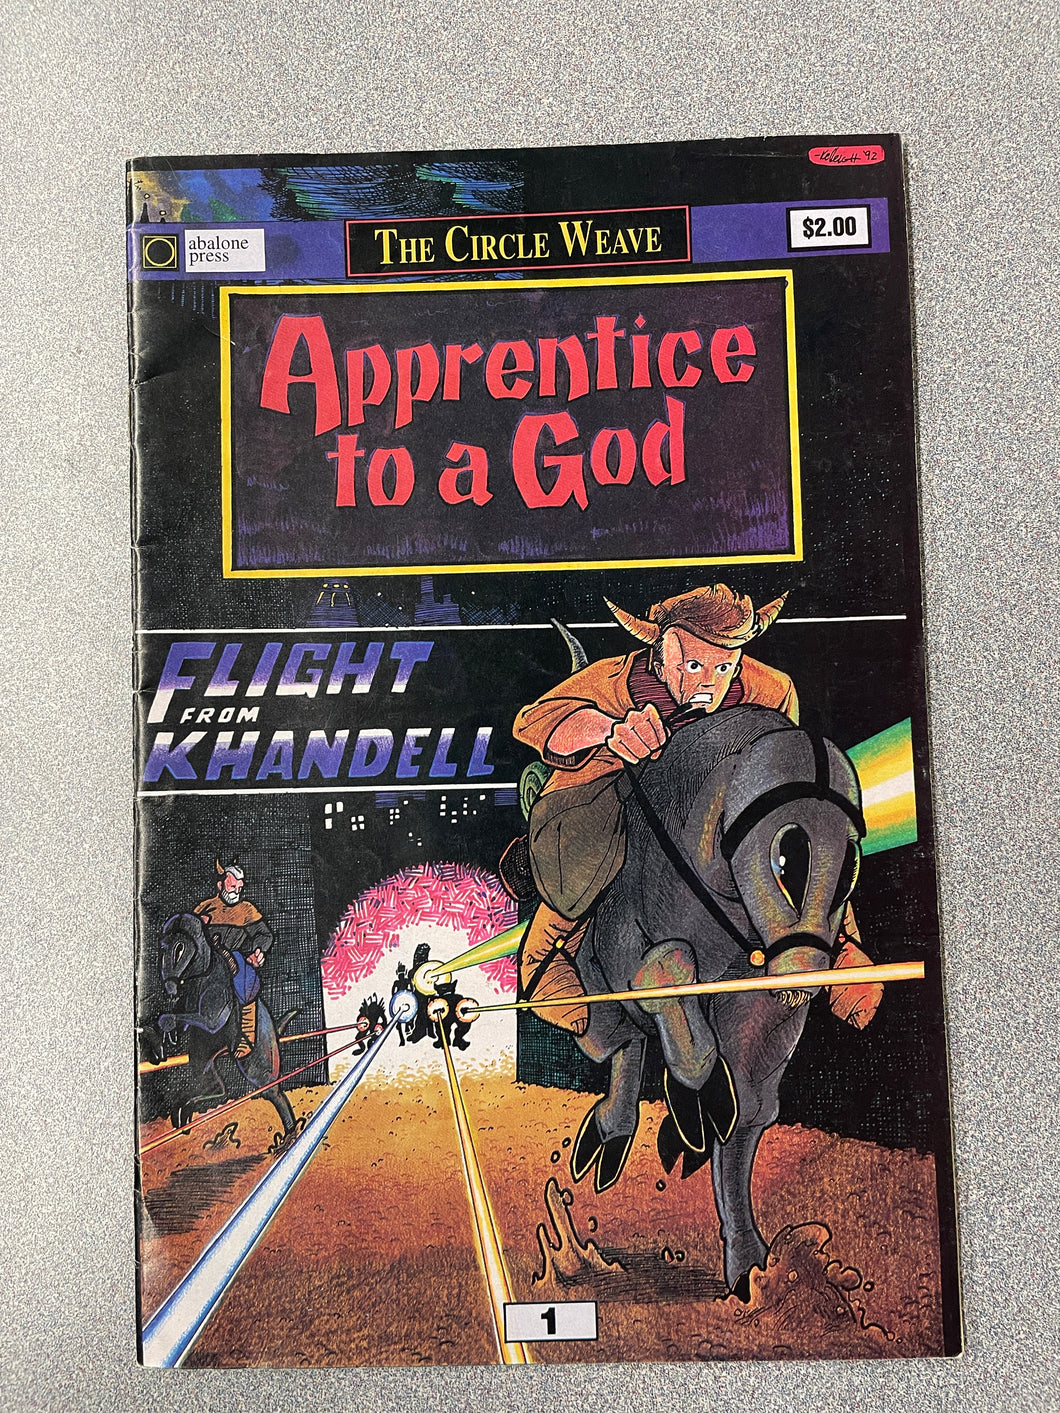 The Circle Weave: Apprentice to a God, Chapter One: Flight From Khandell, Kelleigh, Matthew [1995] GN 4/24